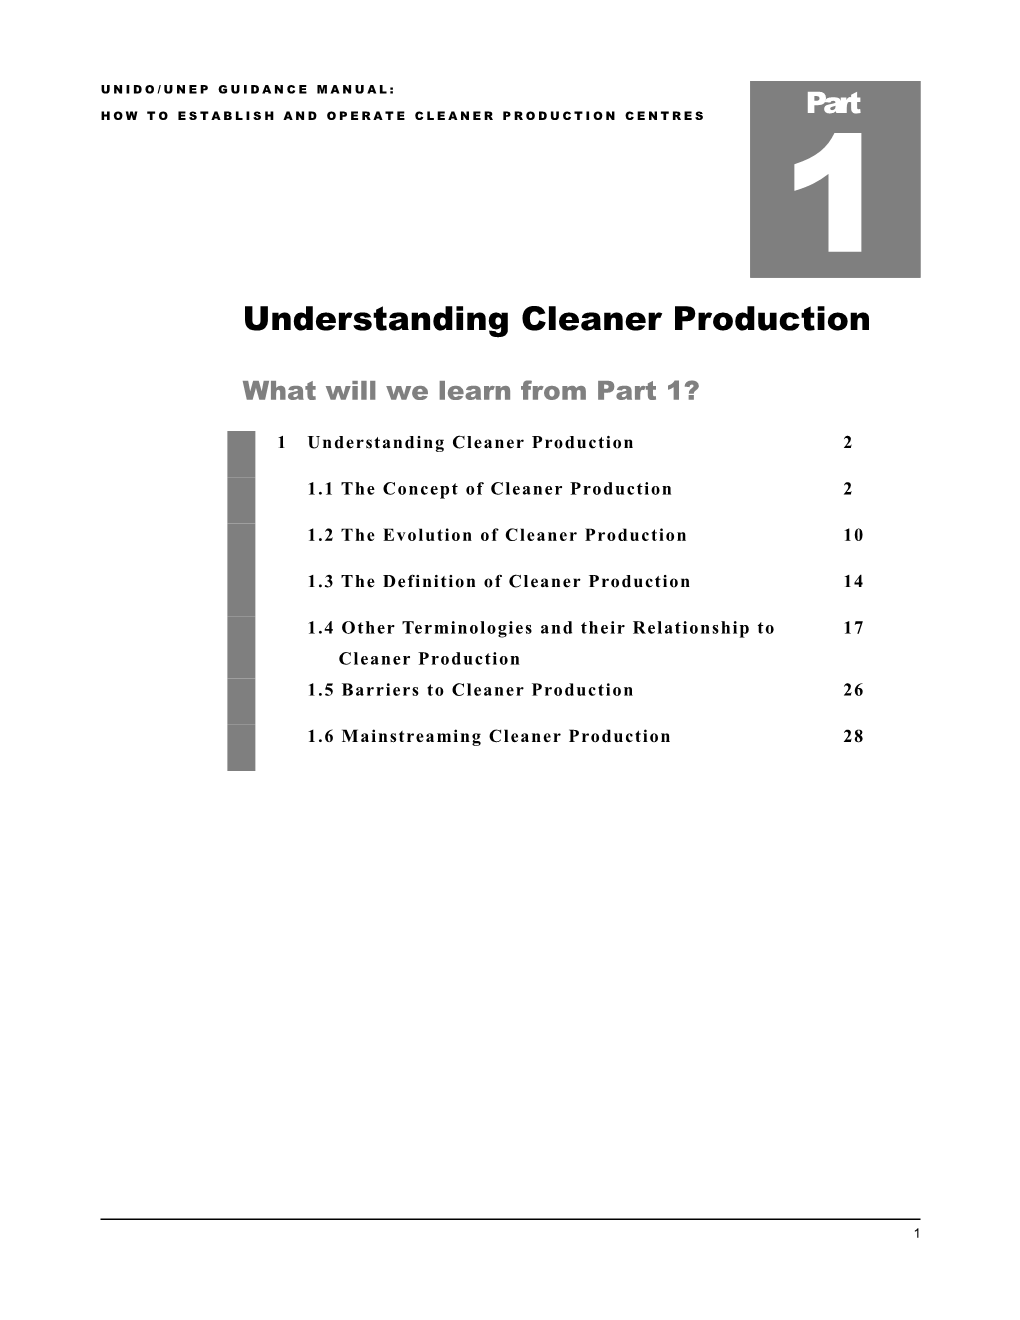 How to Establish and Operate Cleaner Production Centres